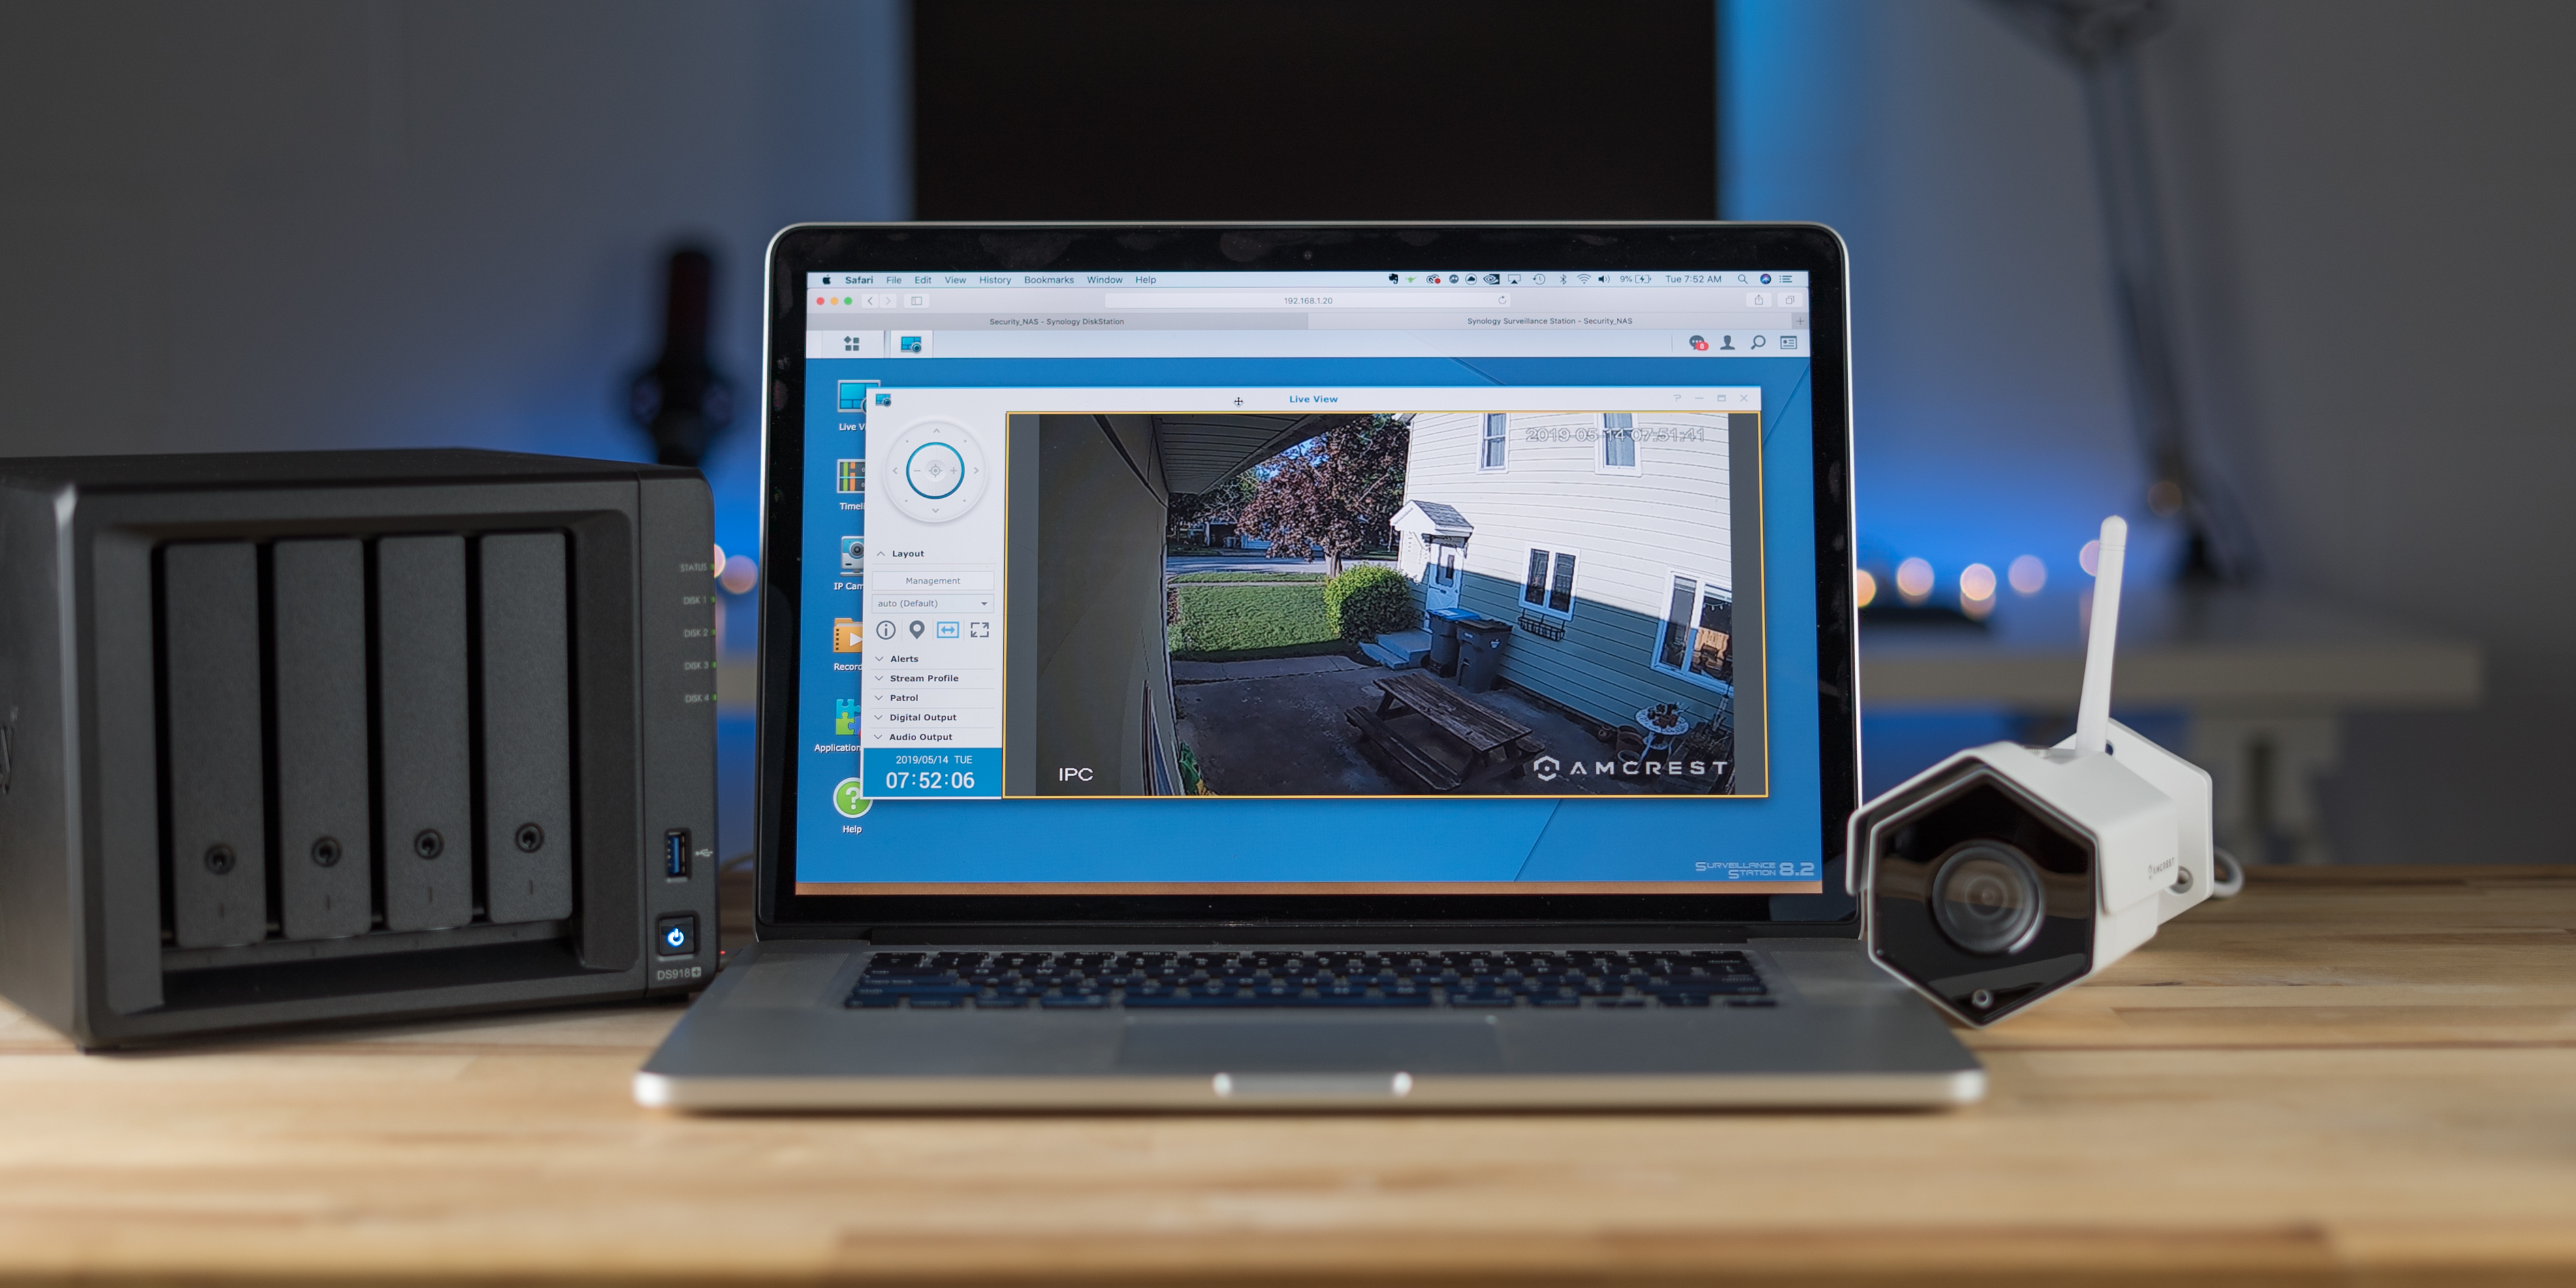 Synology Surveillance Station: A quick look at getting setup